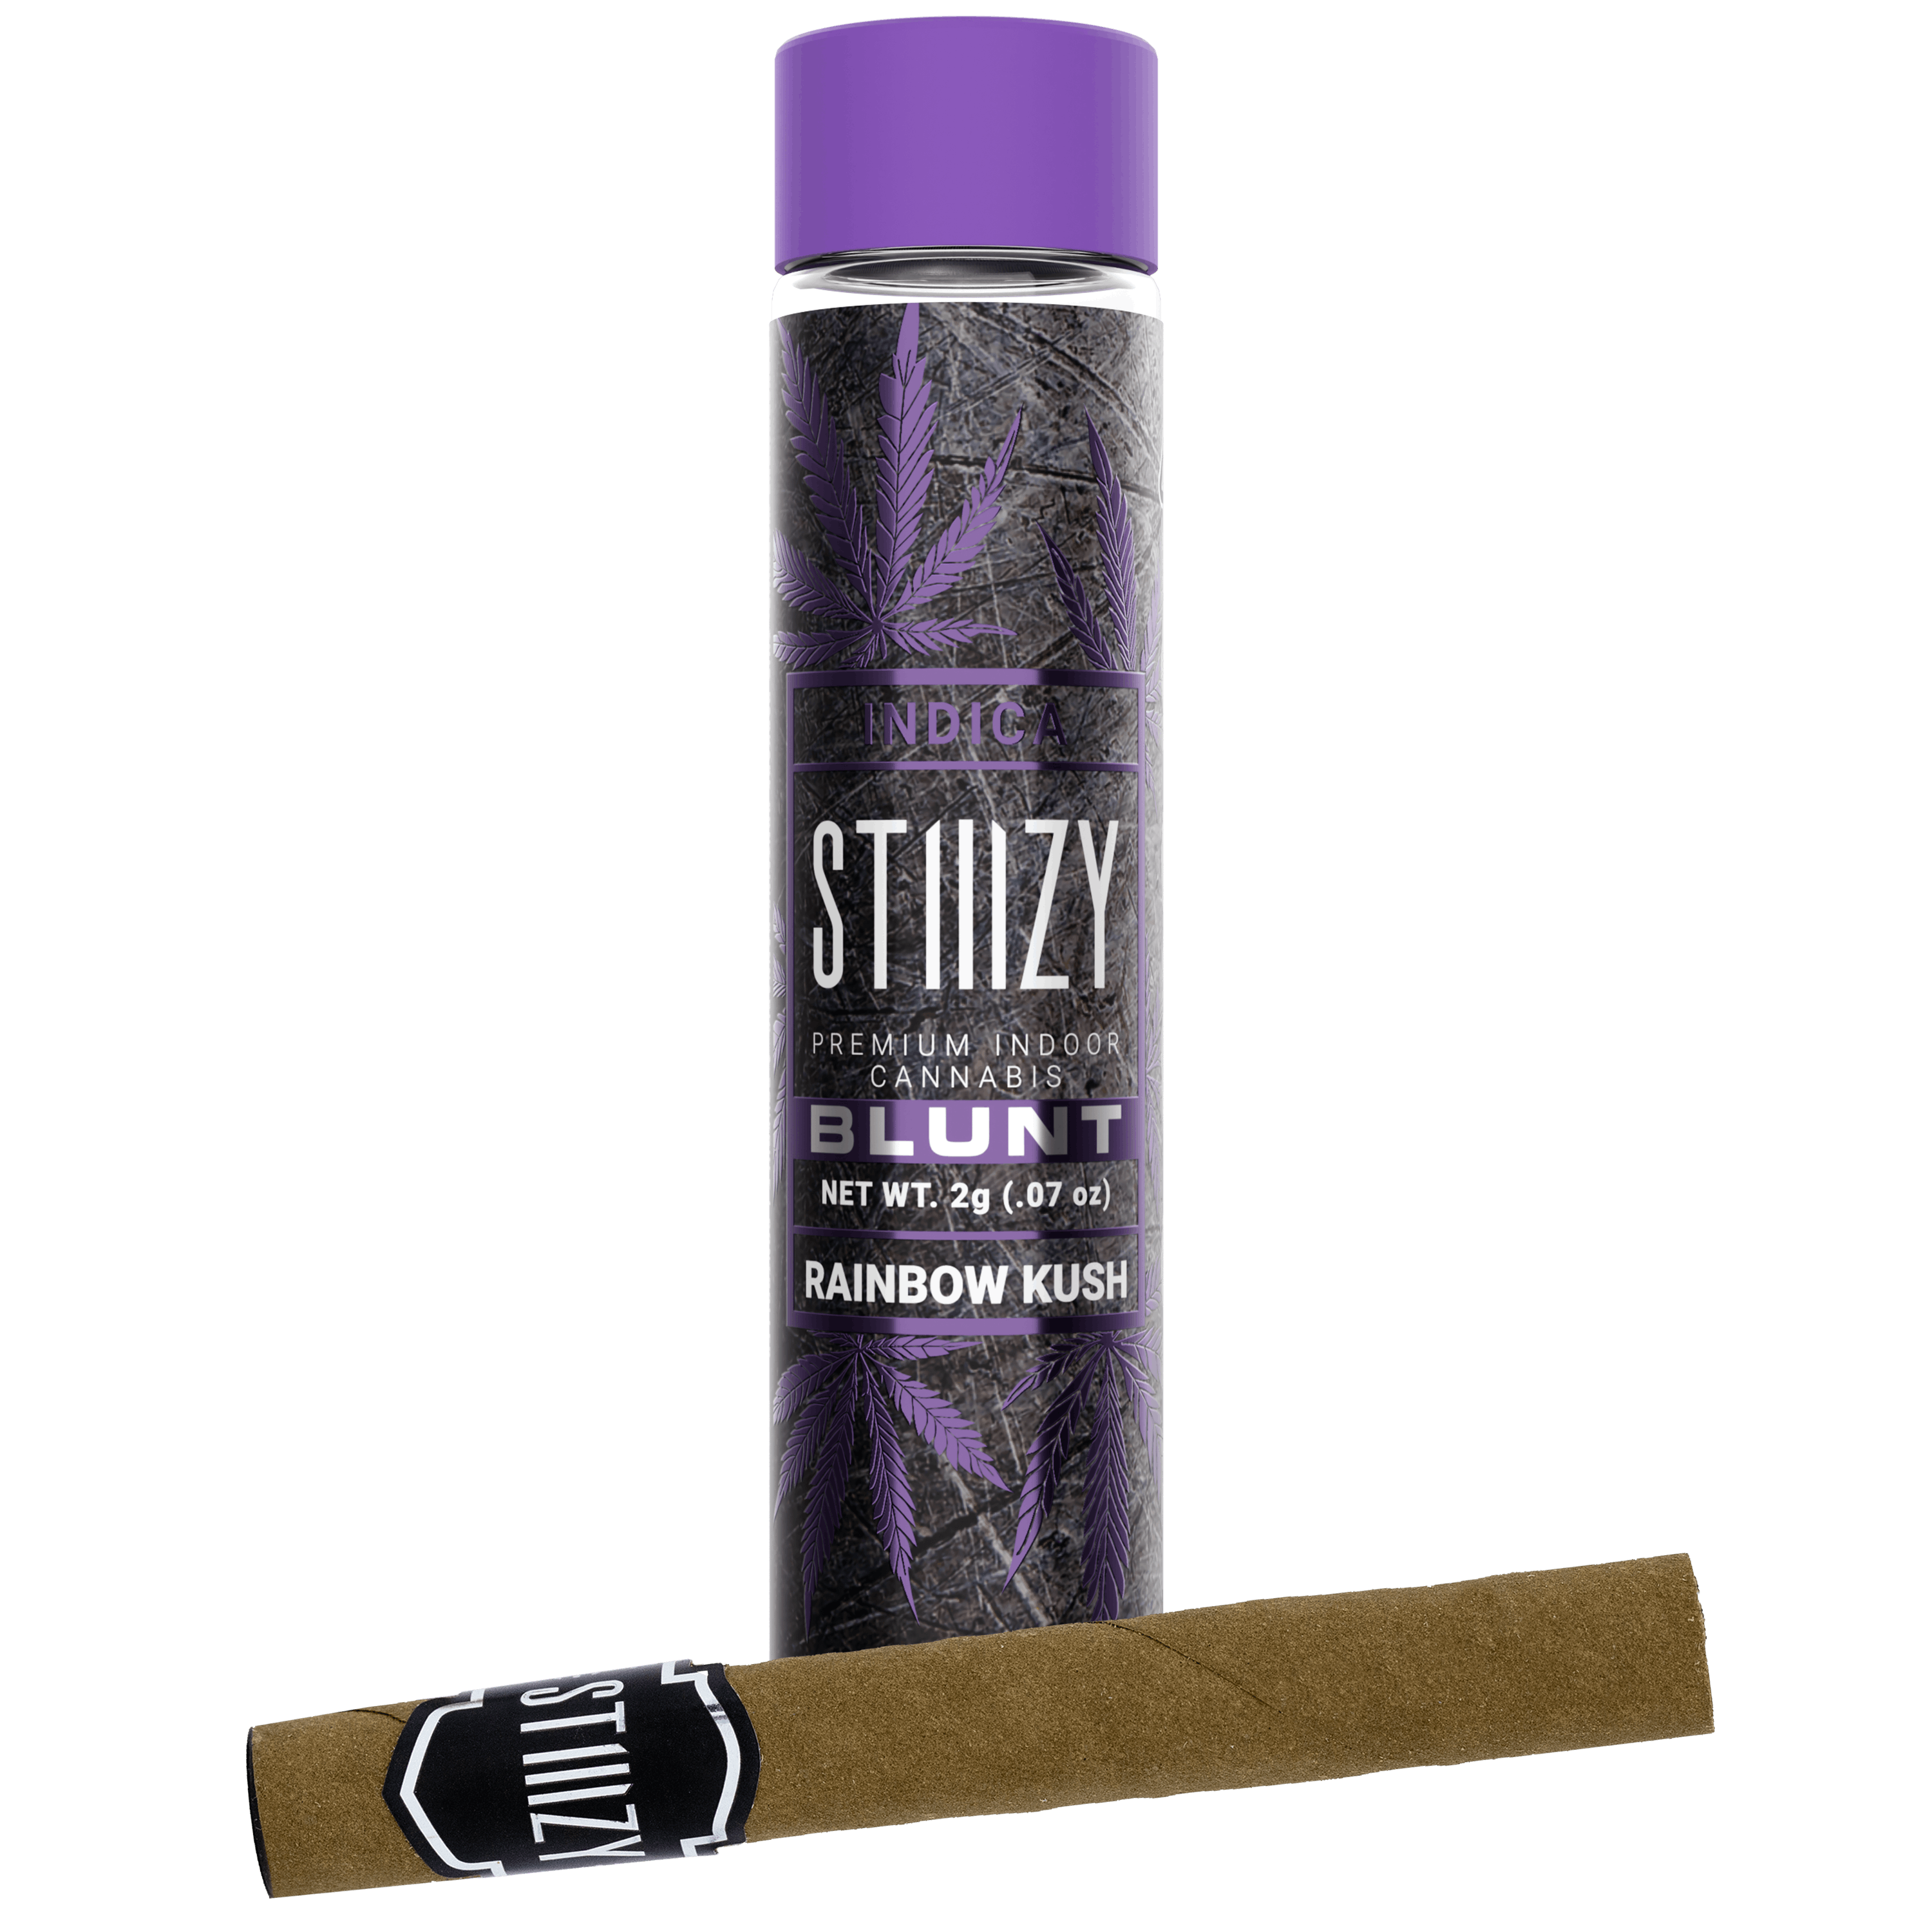 A cannabis blunt with flower from the Rainbow Kush strain lies in front of its purple-capped jar.